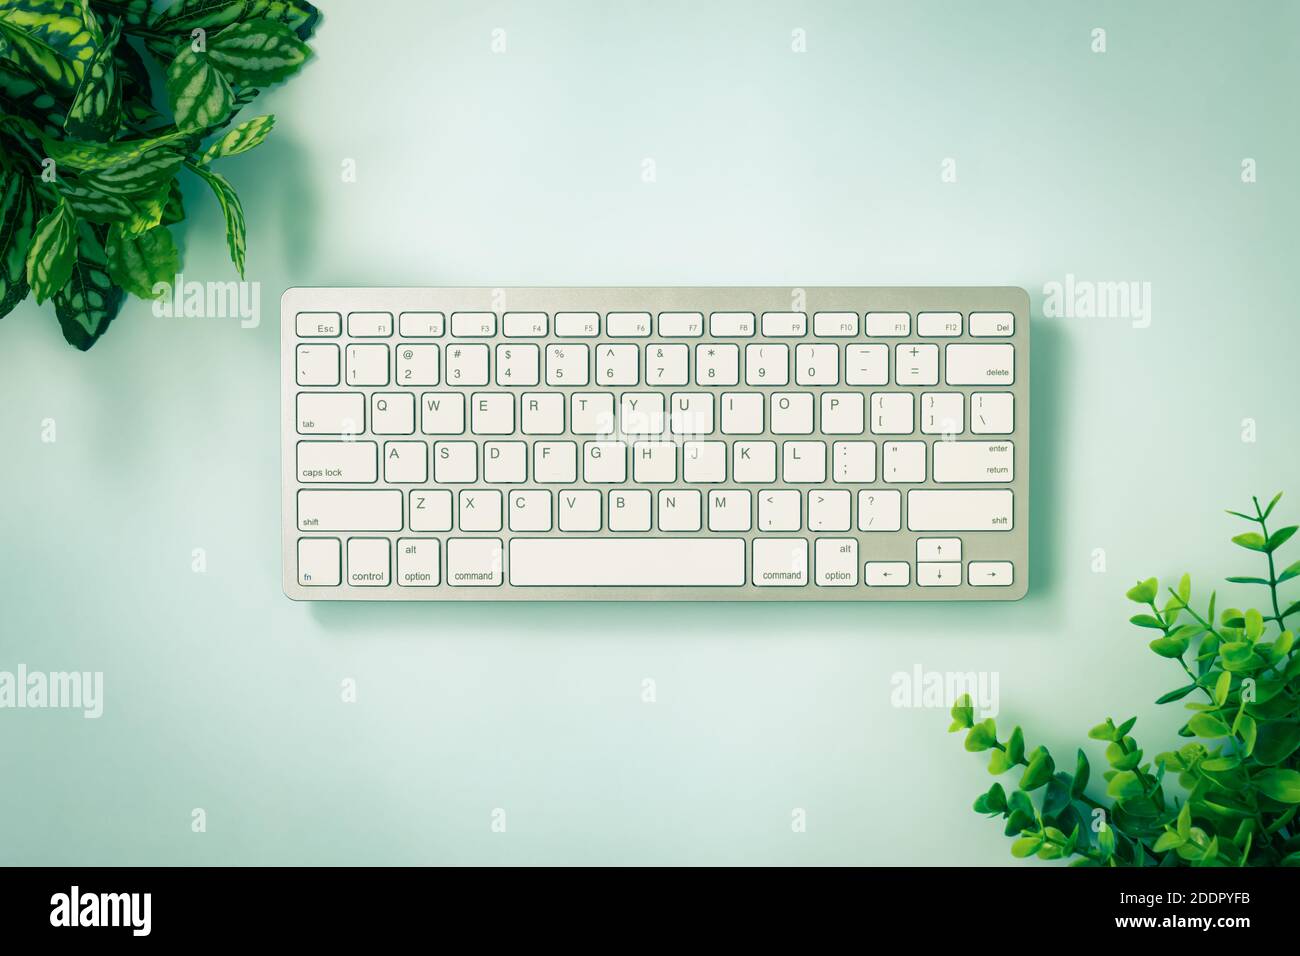 White Portable Computer Keyboard Keys or Keyboard Button and Tree or Plant at Top Left and Bottom Right Corner on Blue Pastel Minimalist Background in Stock Photo